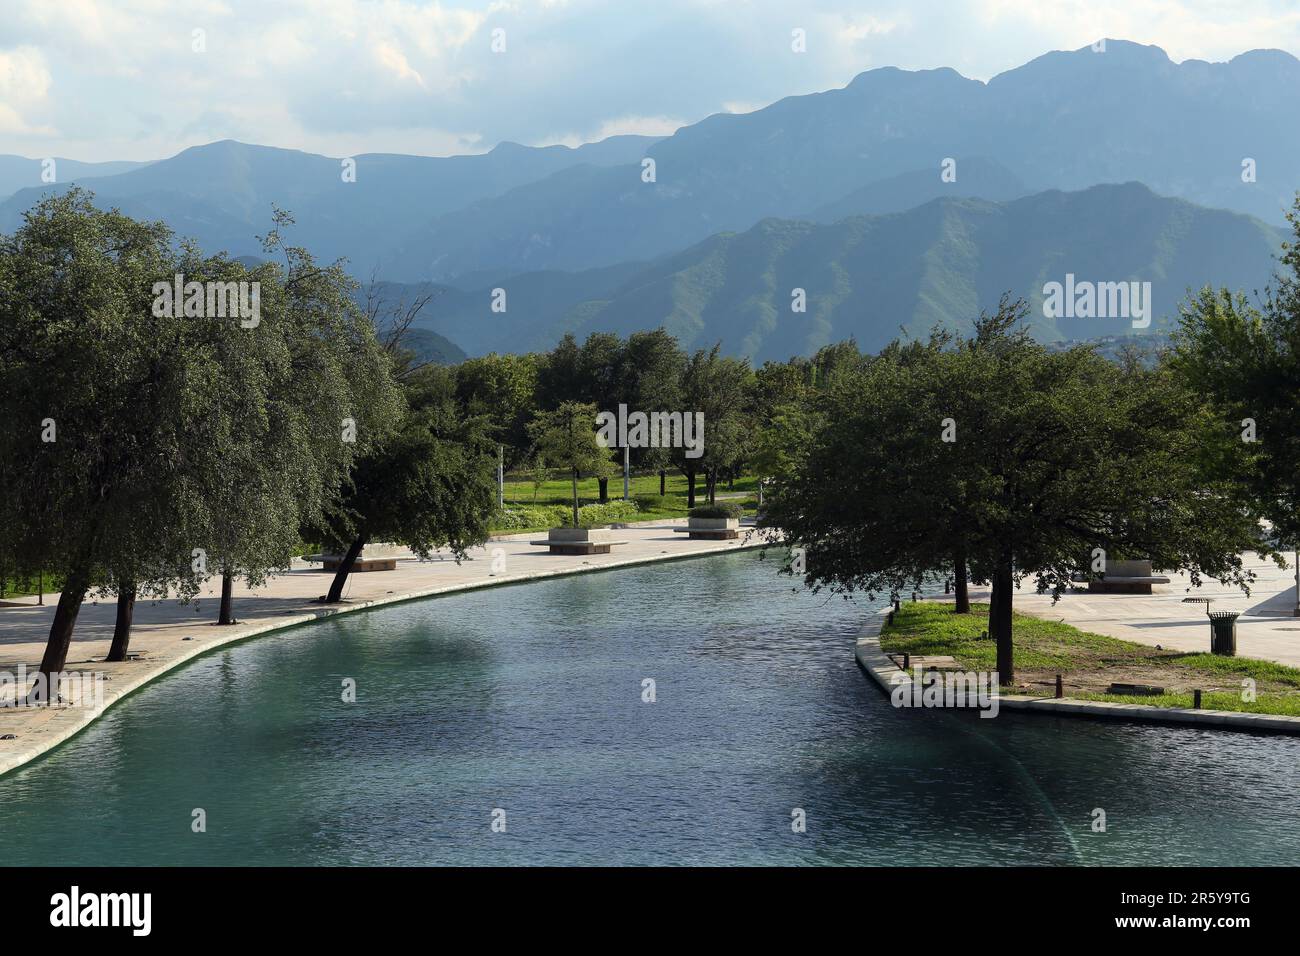 Picturesque view of canal, green trees in park Stock Photo